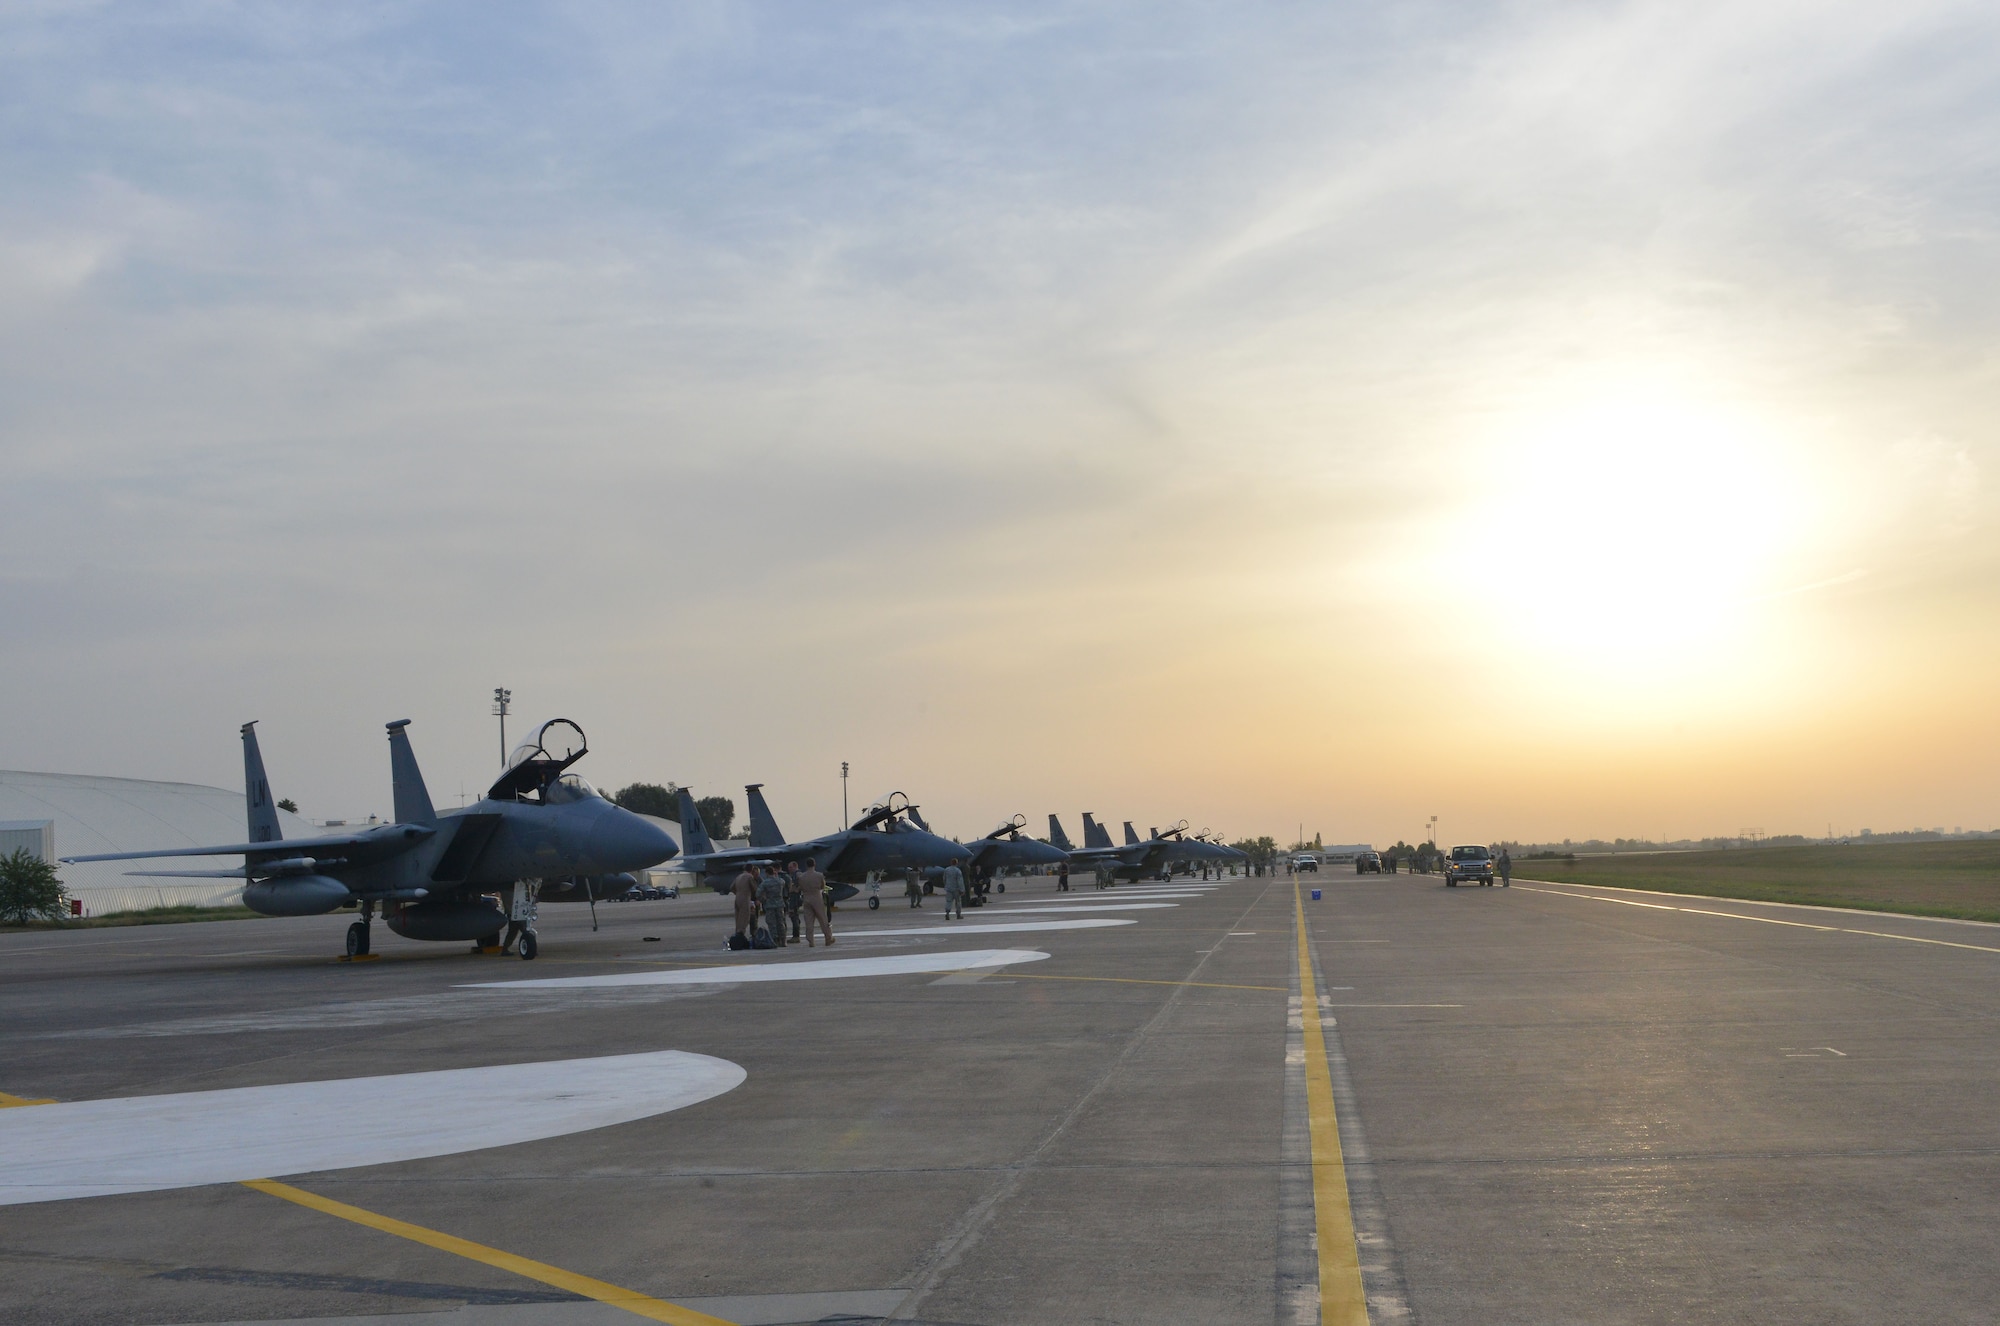 Six F-15C Eagles from the 493rd Fighter Squadron at RAF Lakenheath, UK, arrived Nov. 6, 2015, at Incirlik Air Base, Turkey. The six F-15Cs are deployed to Incirlik to conduct combat air patrols in Turkish air space. The U.S. and Turkey, as NATO allies, share a commitment to peace and stability in the region. (U.S. Air Force photo by Staff Sgt. Michael Battles/Released)